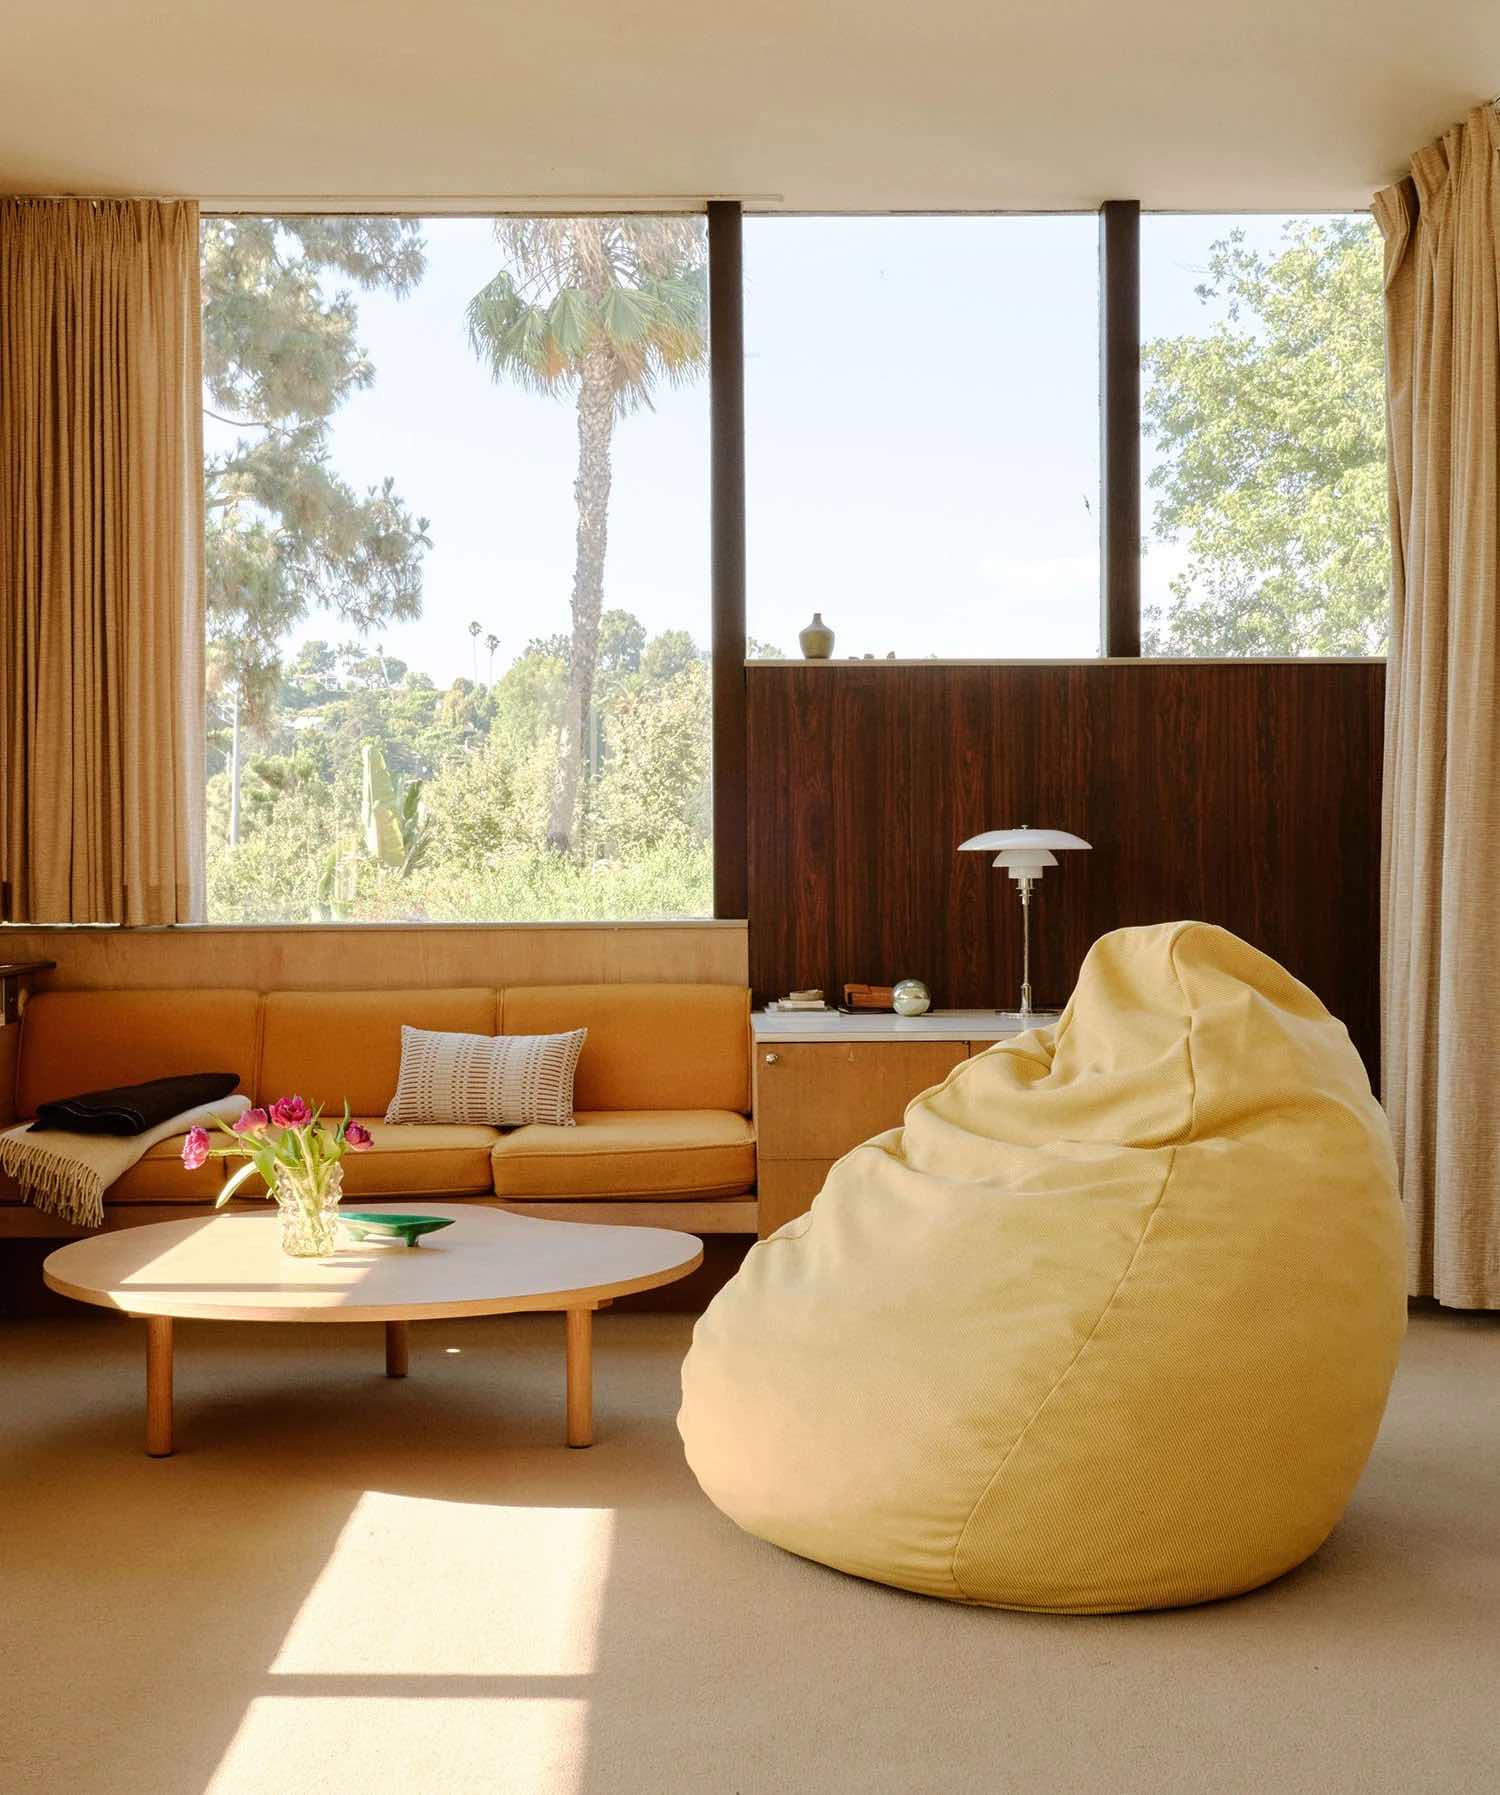 A cozy living room with large windows showcasing a scenic outdoor view. The room features a yellow bean bag chair, a round wooden coffee table with a vase of pink flowers, a built-in bench with yellow cushions, and beige curtains.